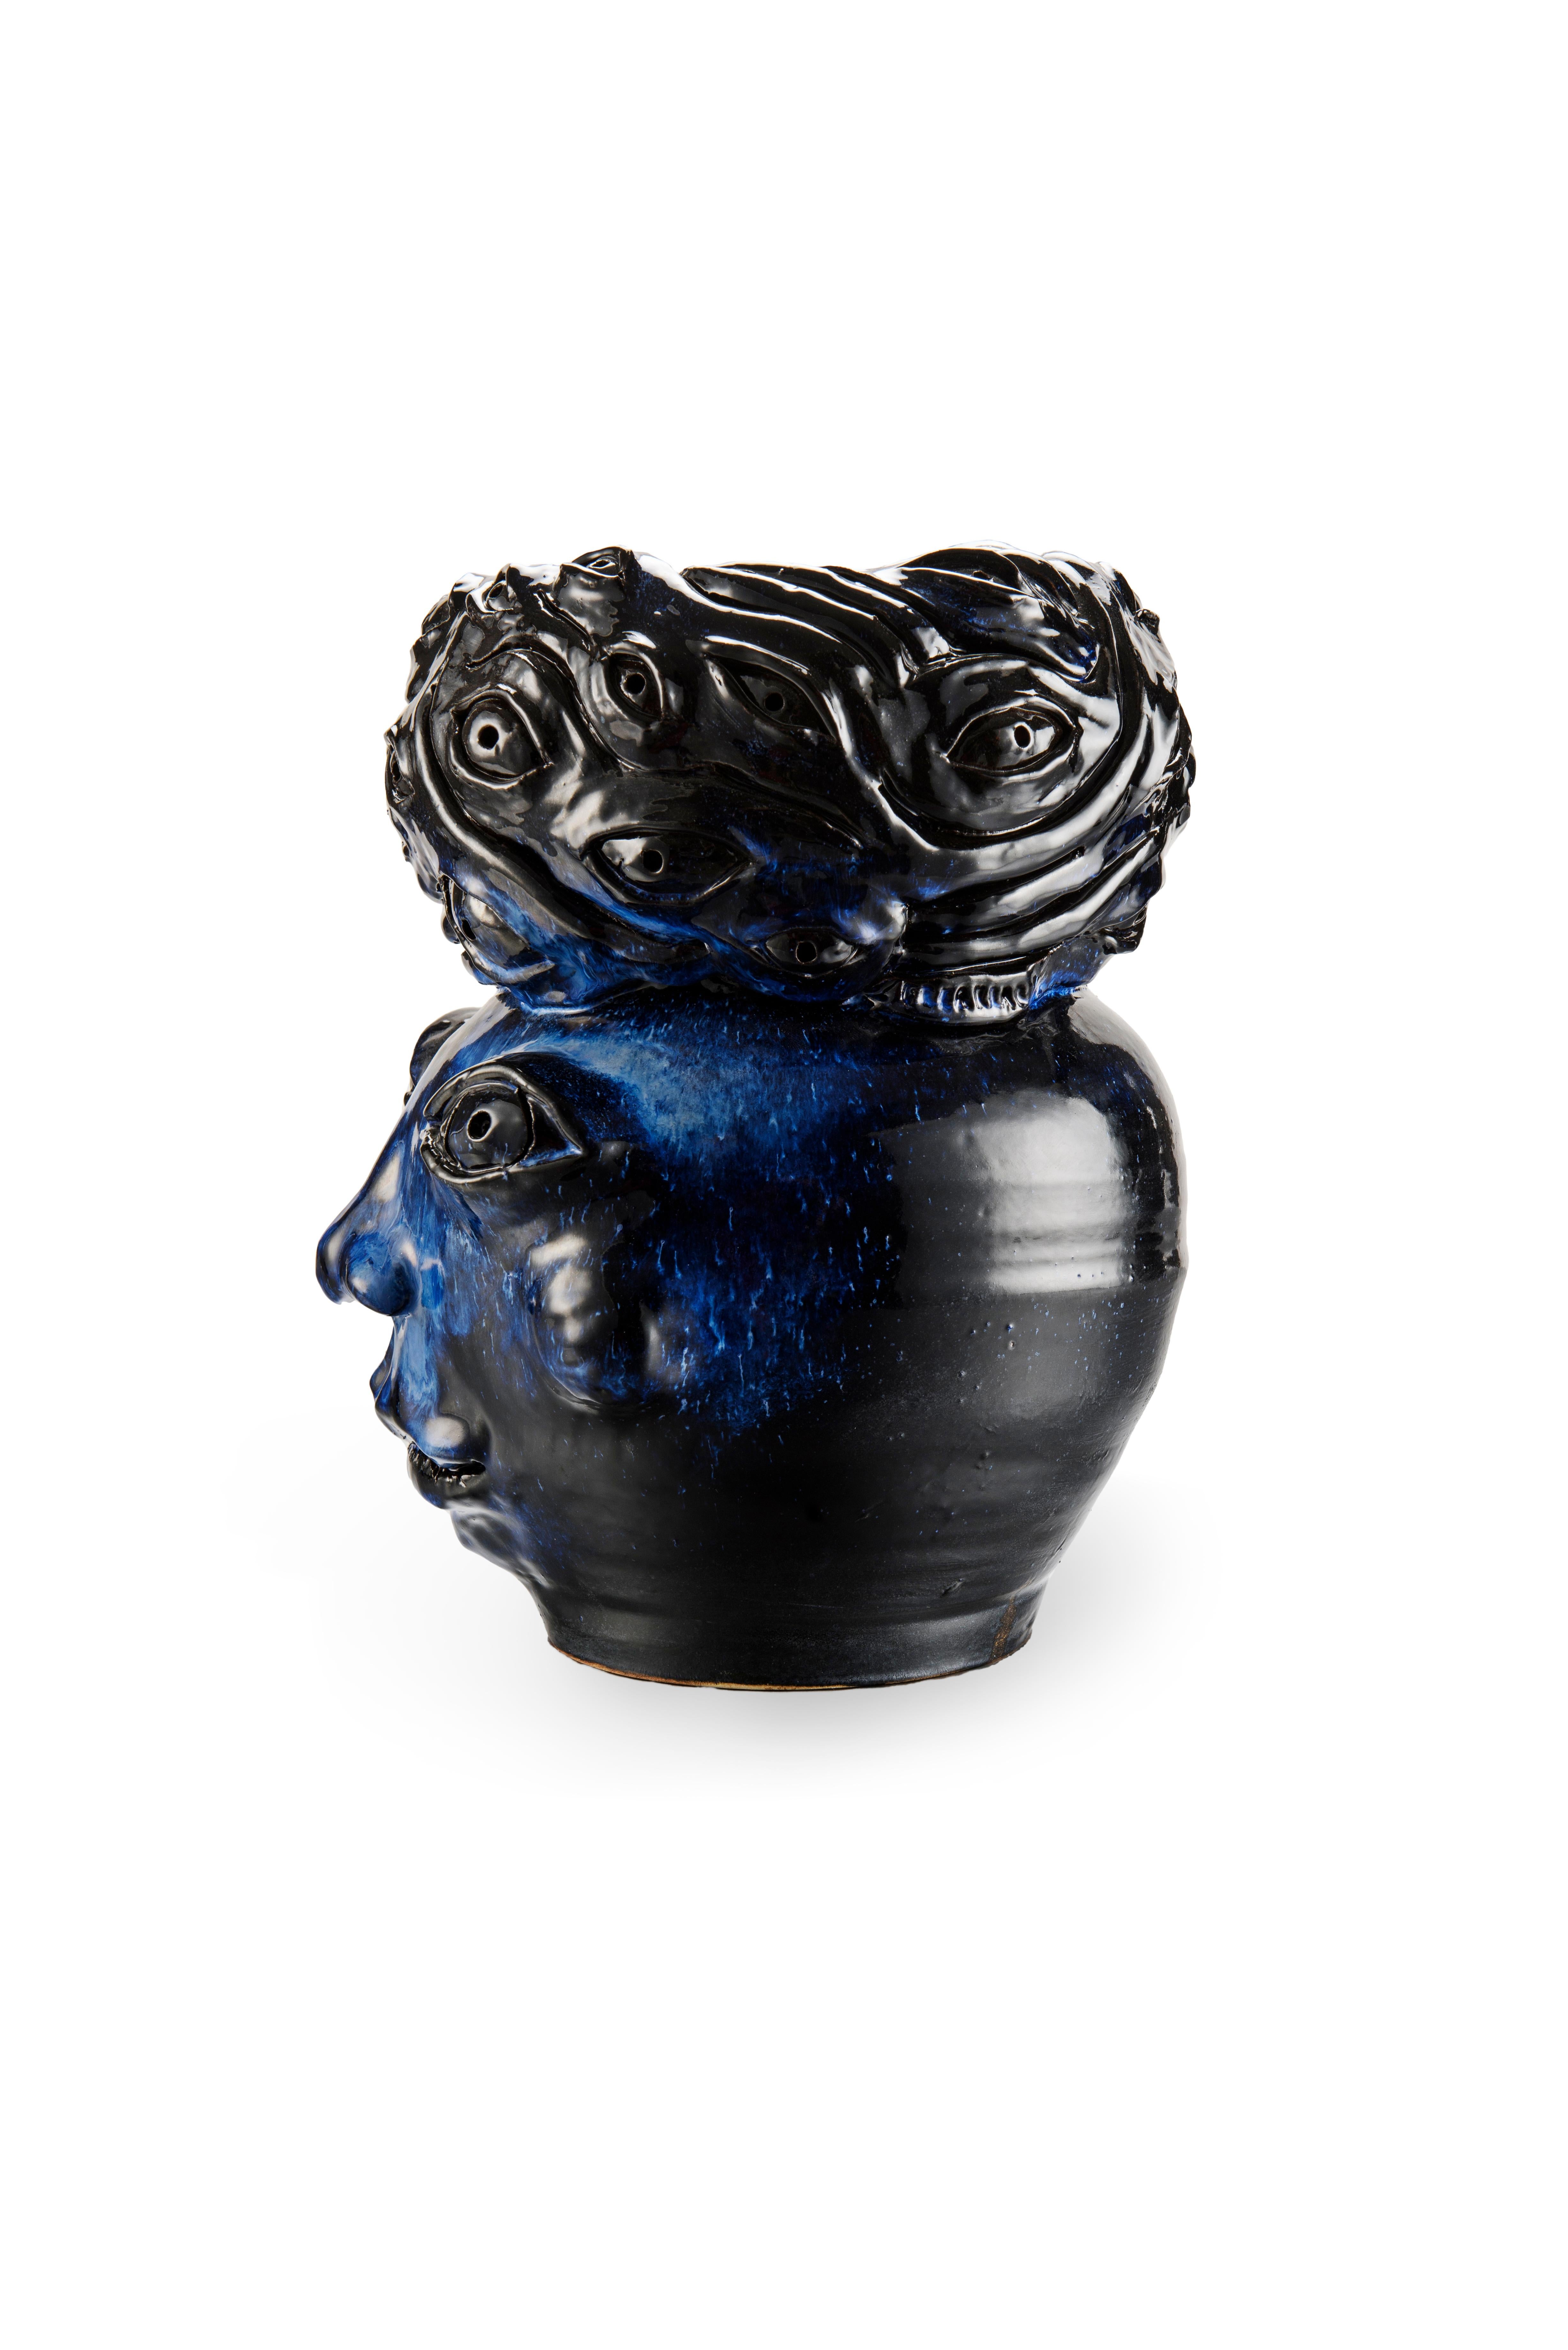 Enameled Freaklab Vase Made Entirely by Hand in Ceramic, Blue-Black Color For Sale